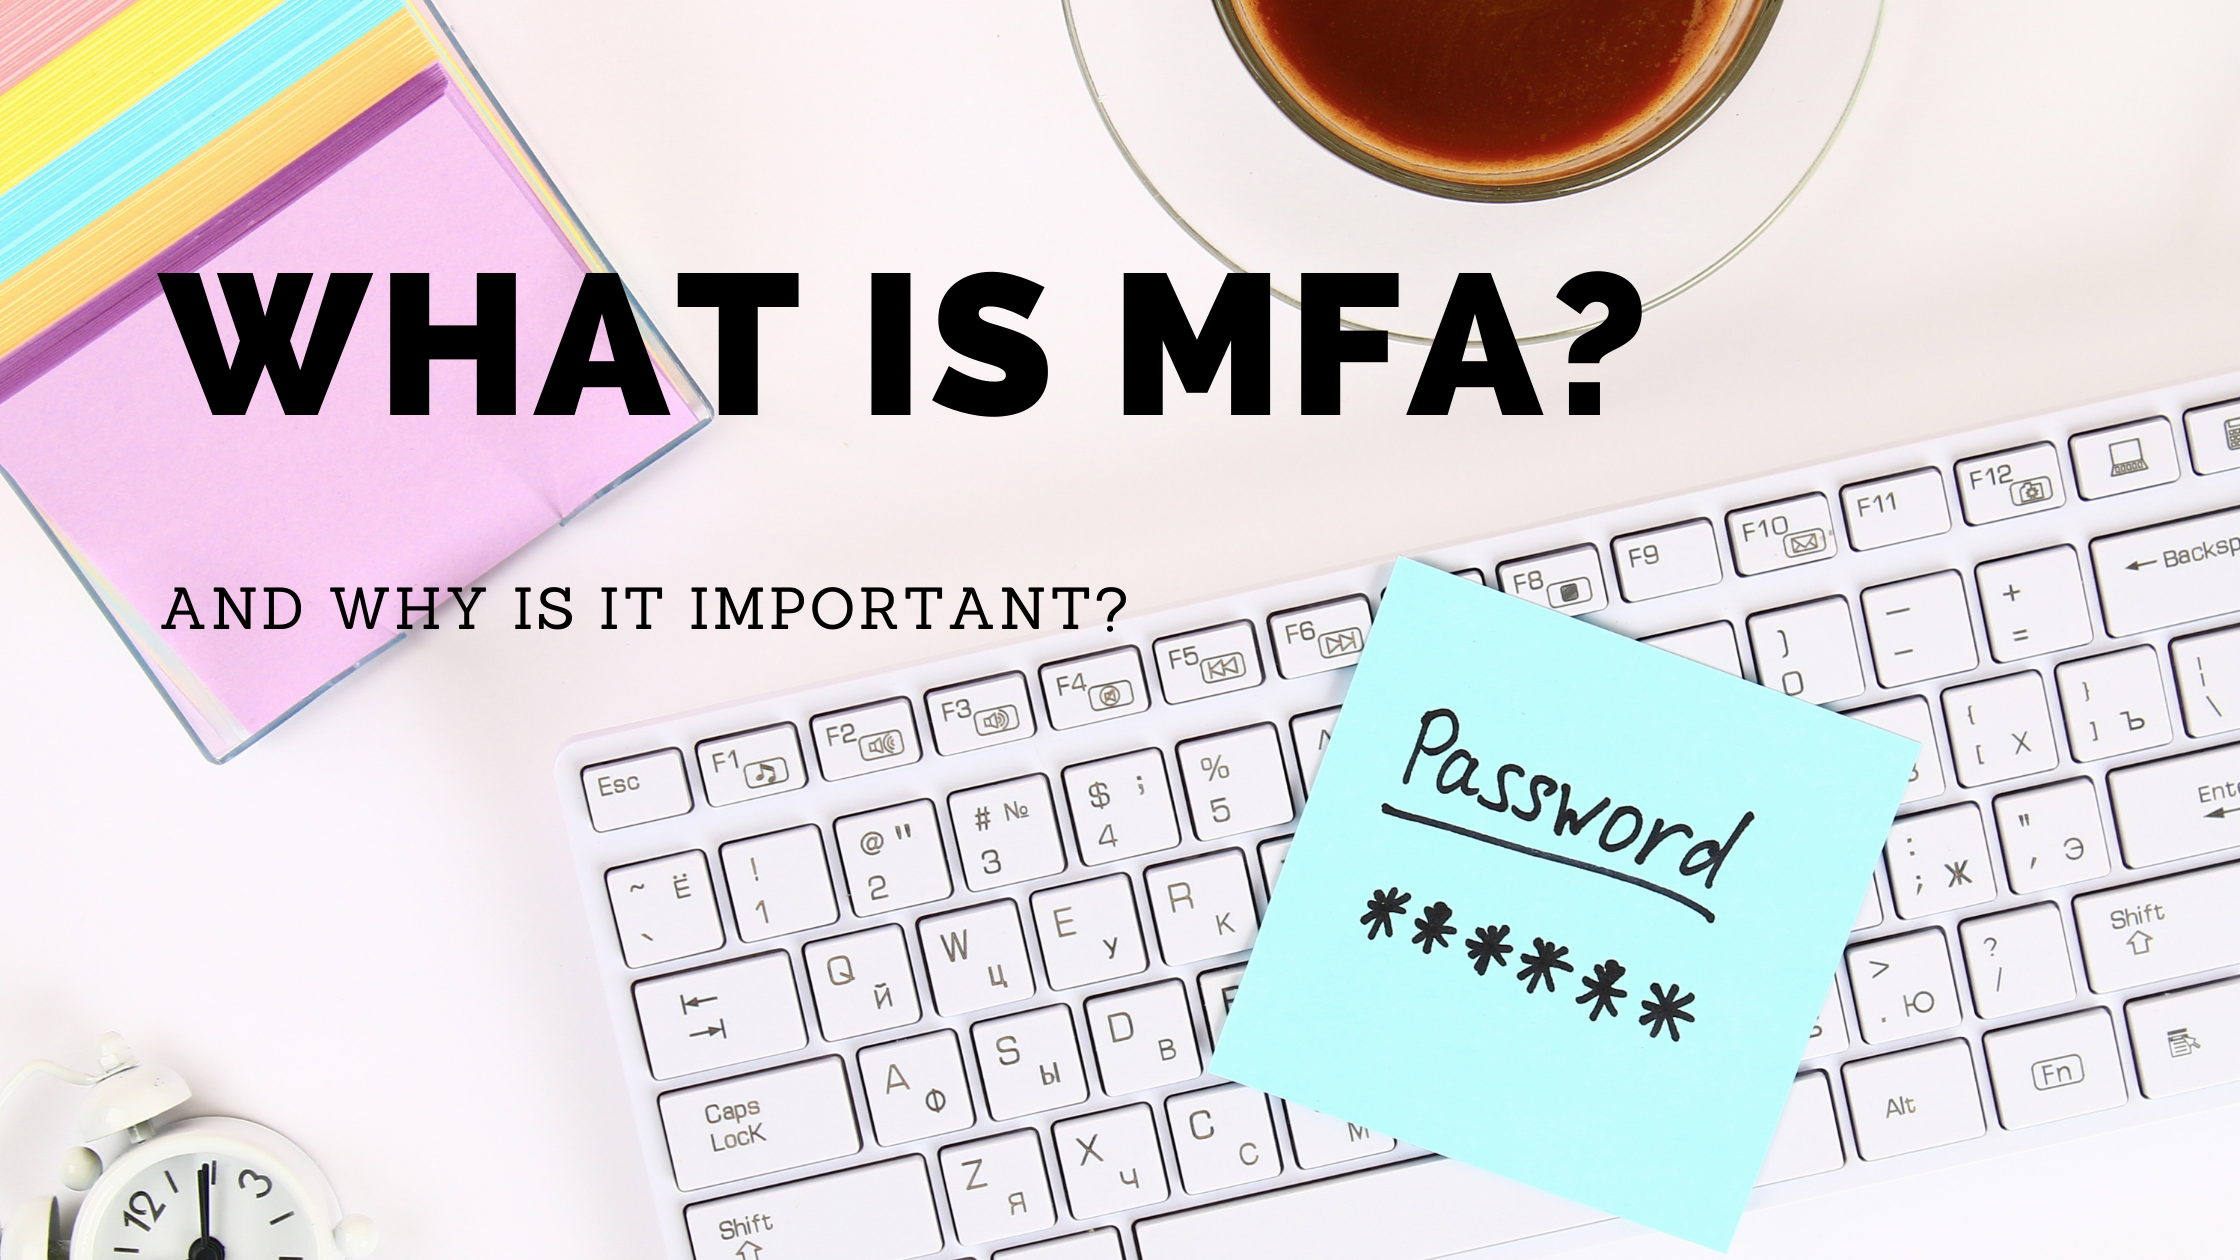 What is MFA? Why is it important?